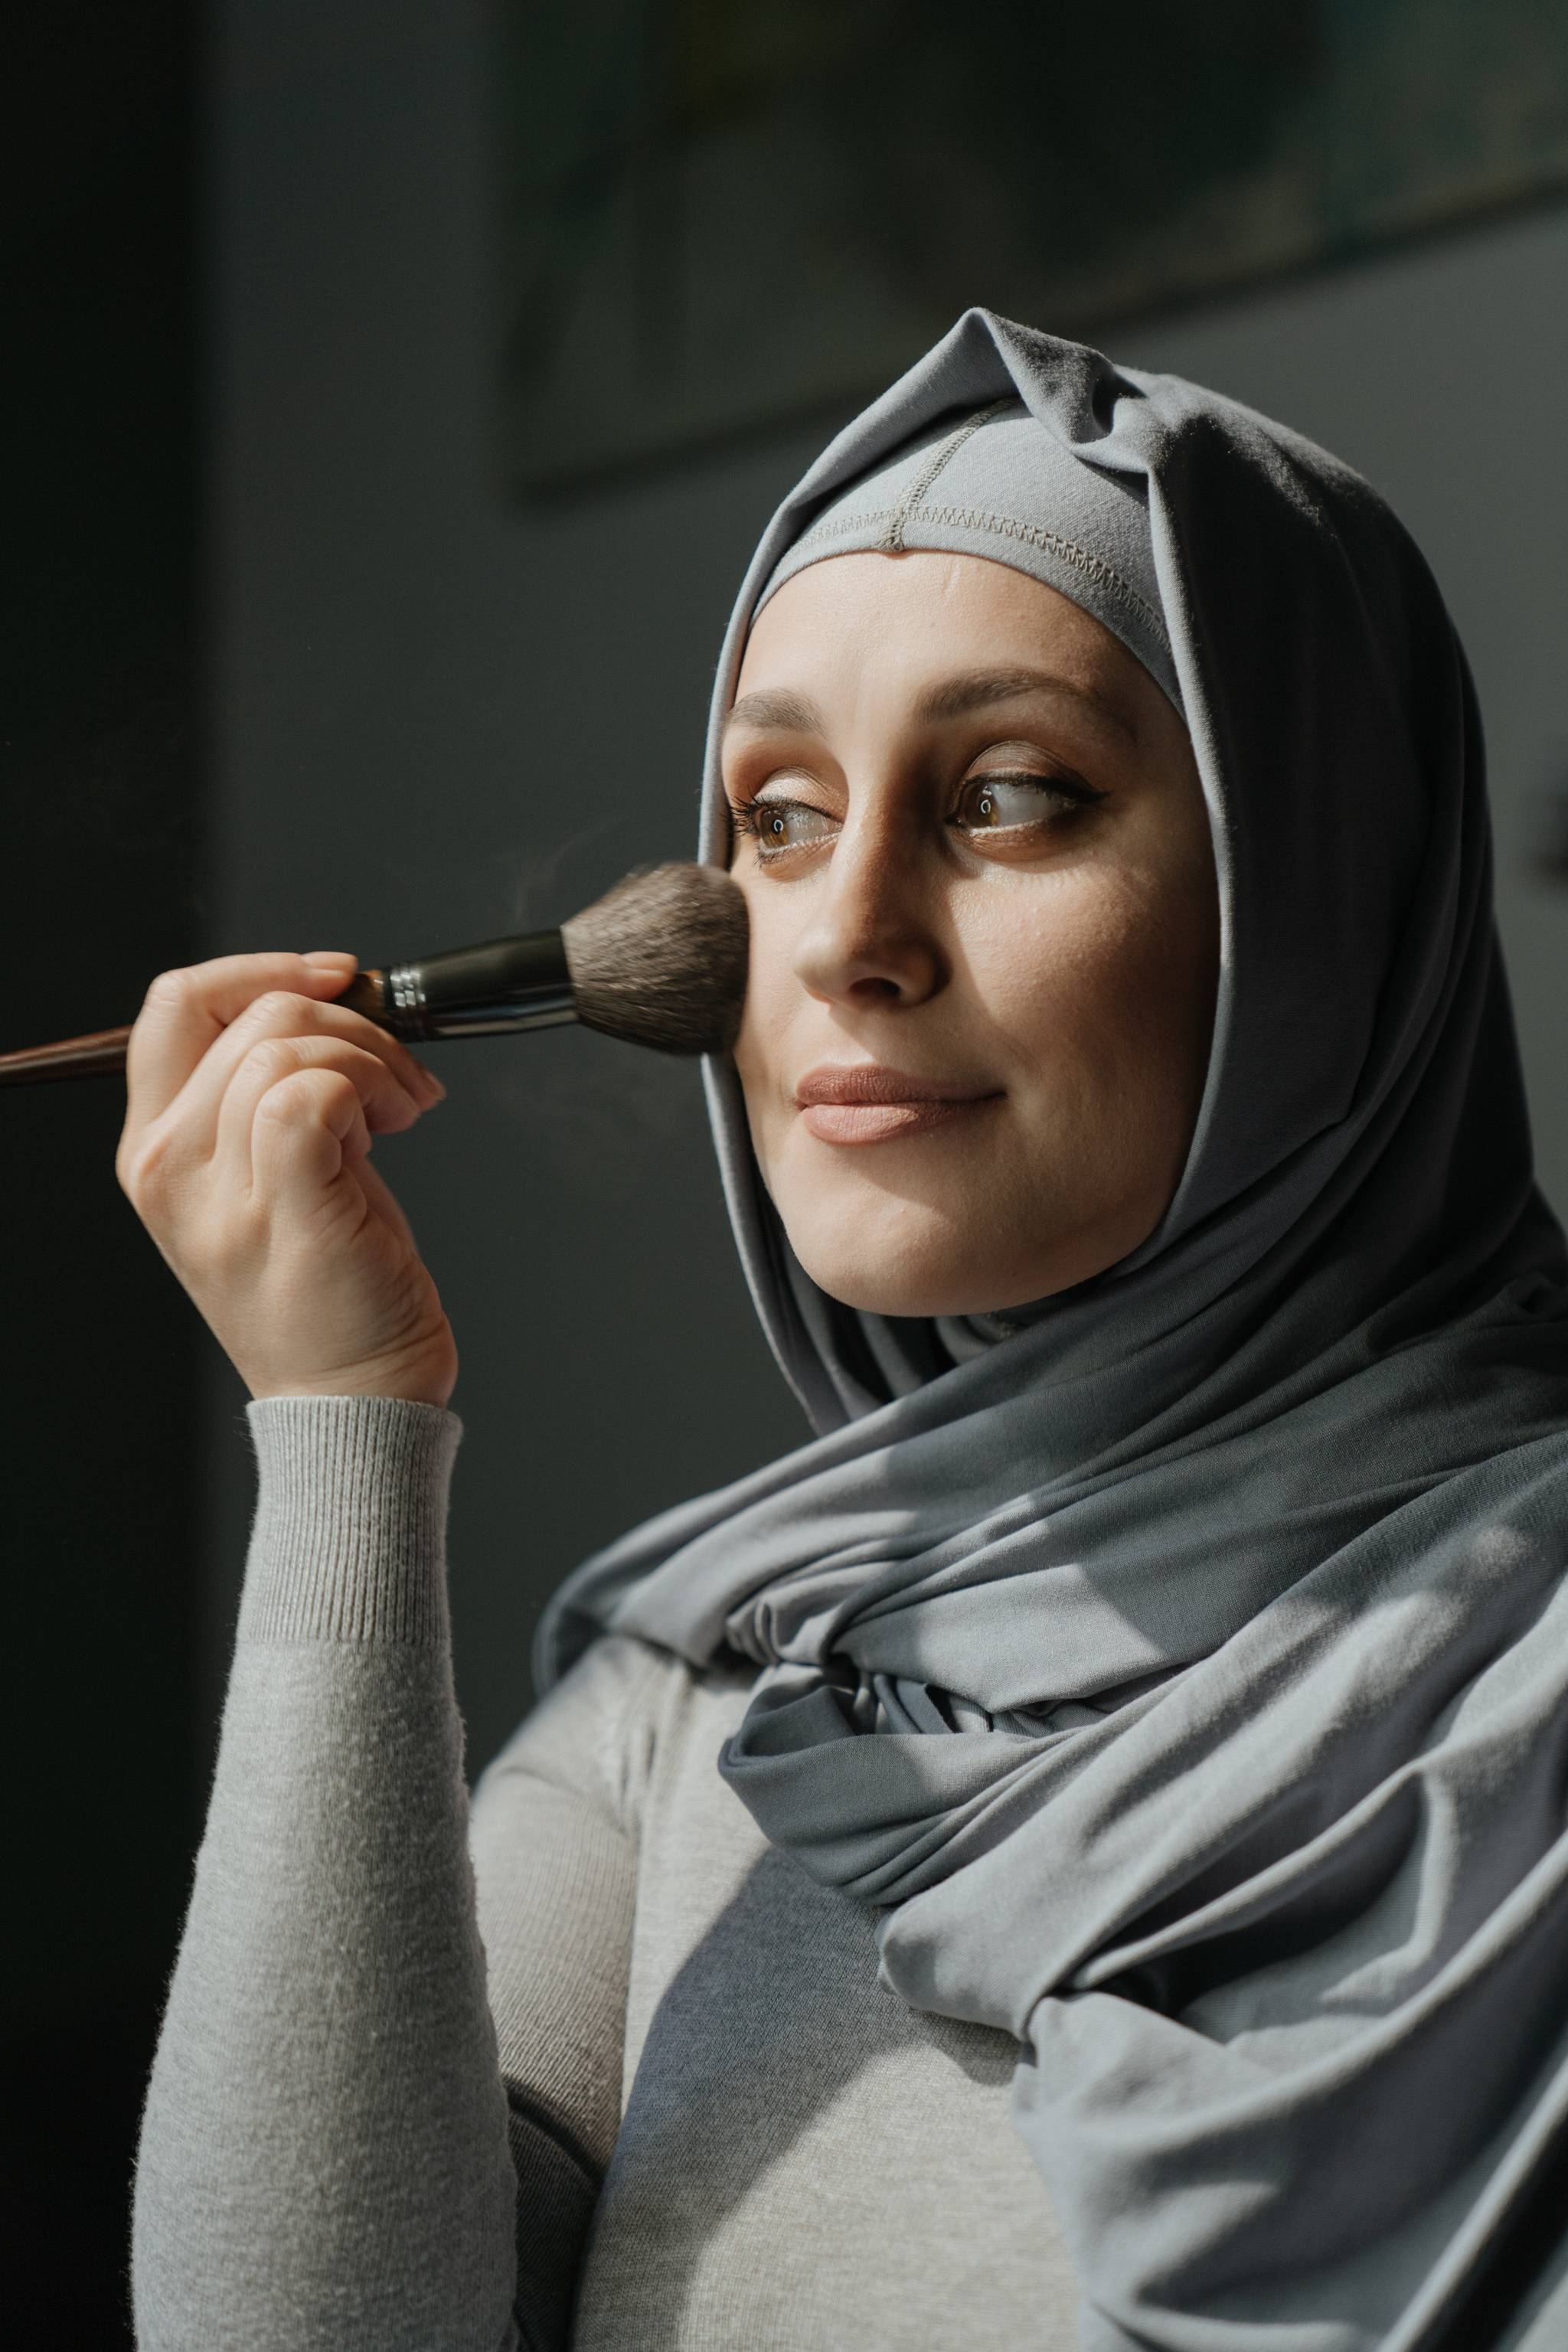 Arab women want products tailored to local beauty needs